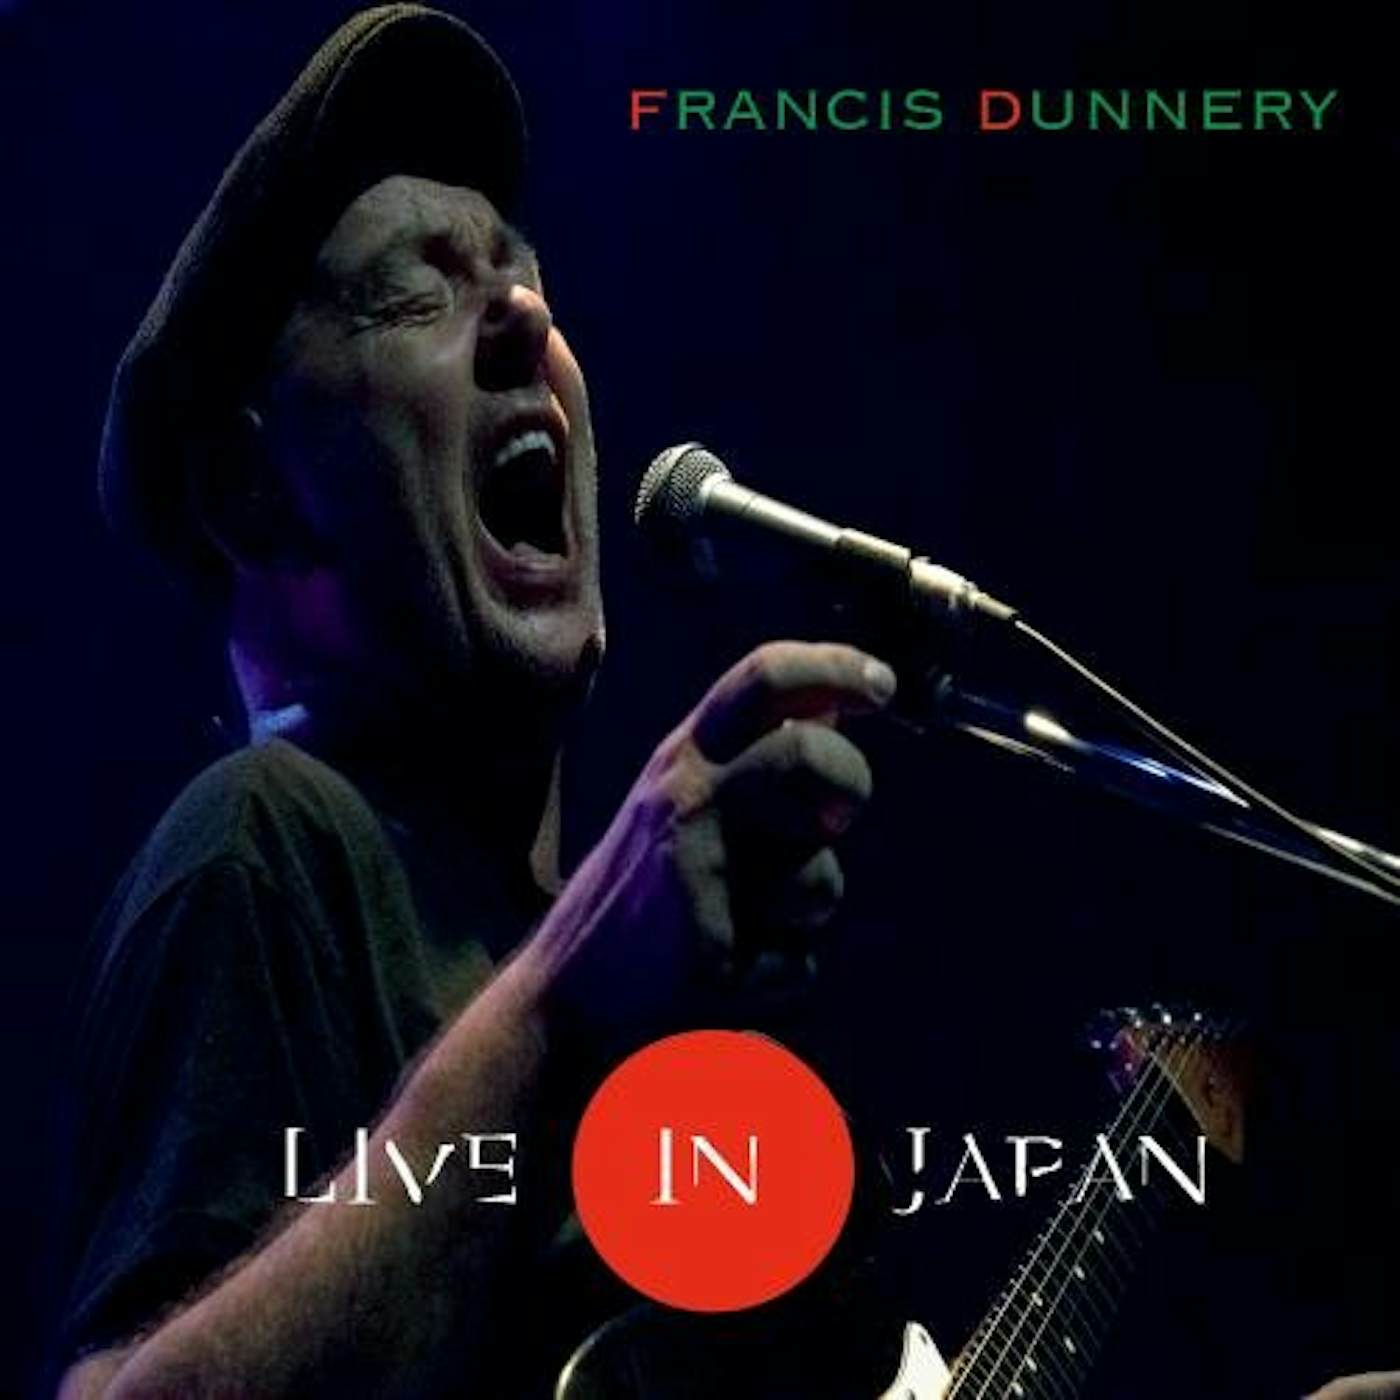 Francis Dunnery LIVE IN JAPAN (UHQCD) CD